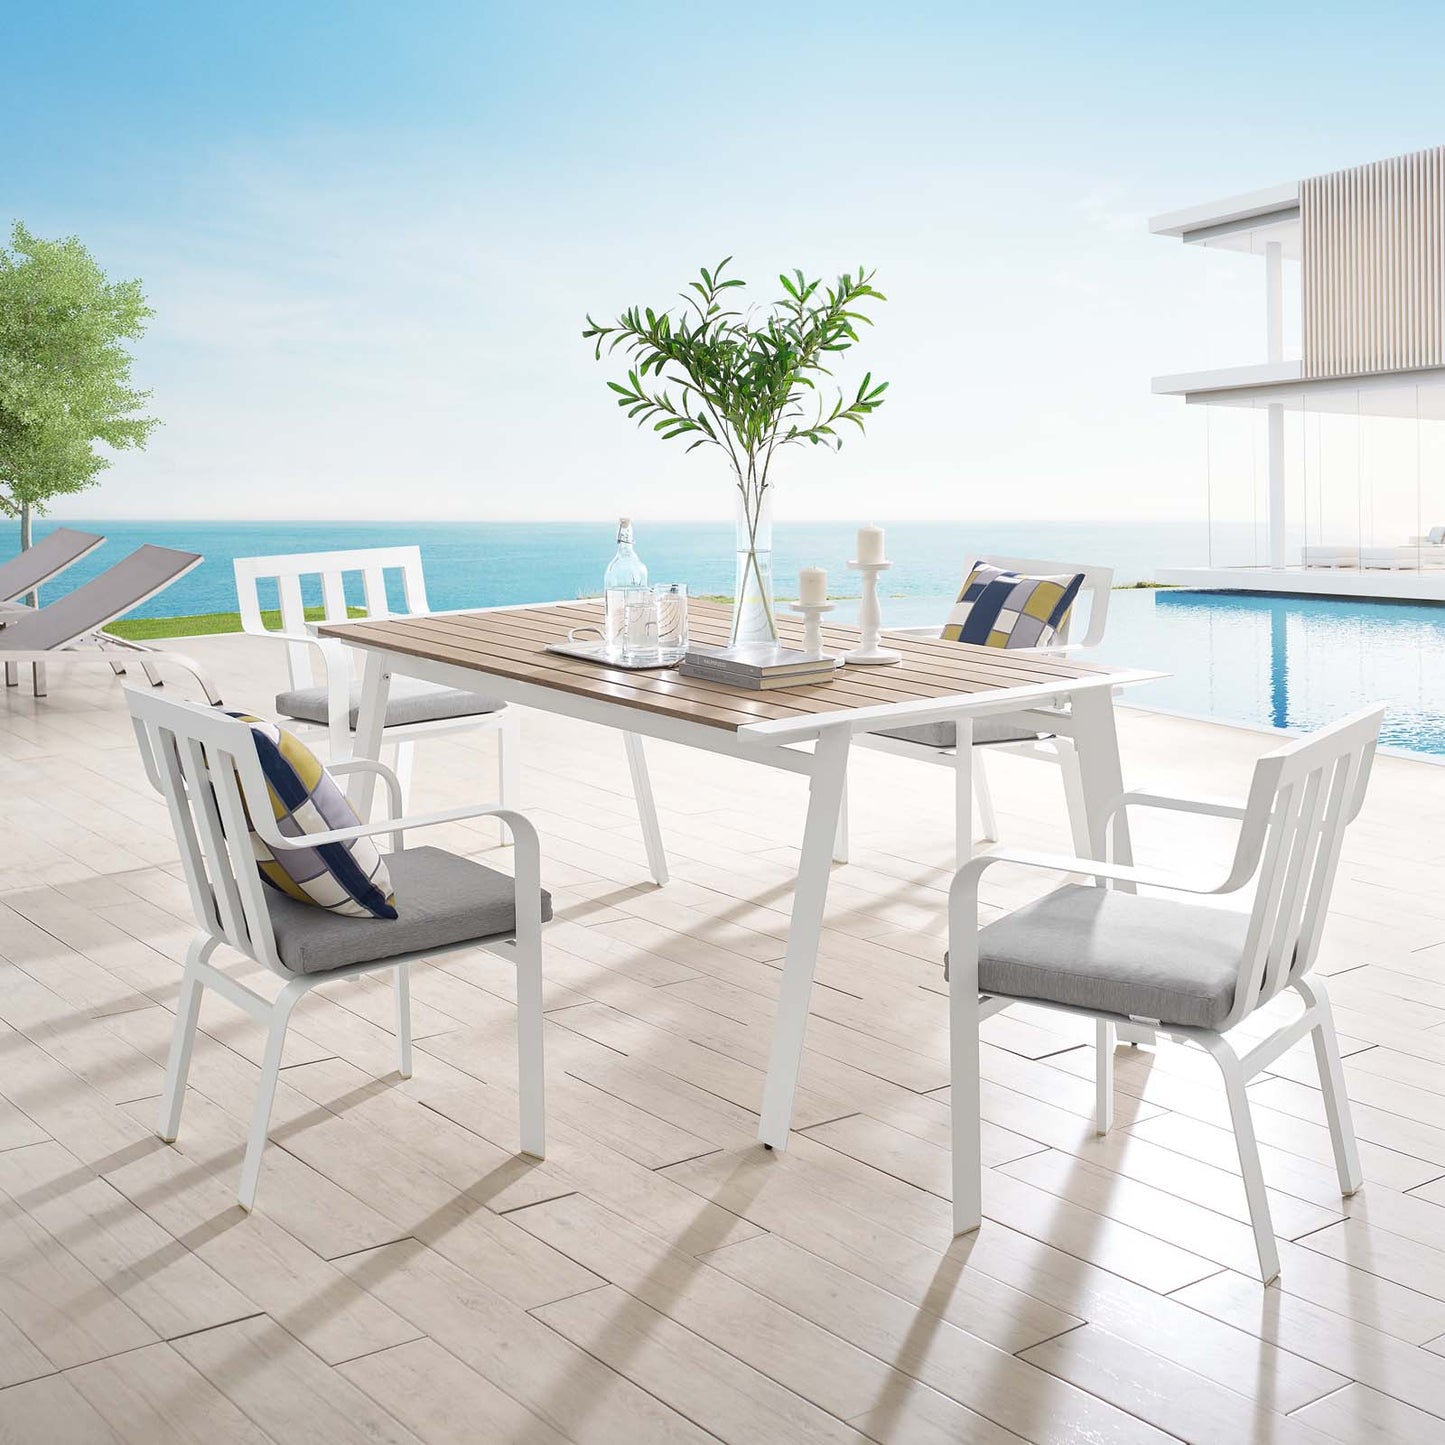 Baxley 5 Piece Outdoor Patio Aluminum Dining Set White Gray EEI-3964-WHI-GRY